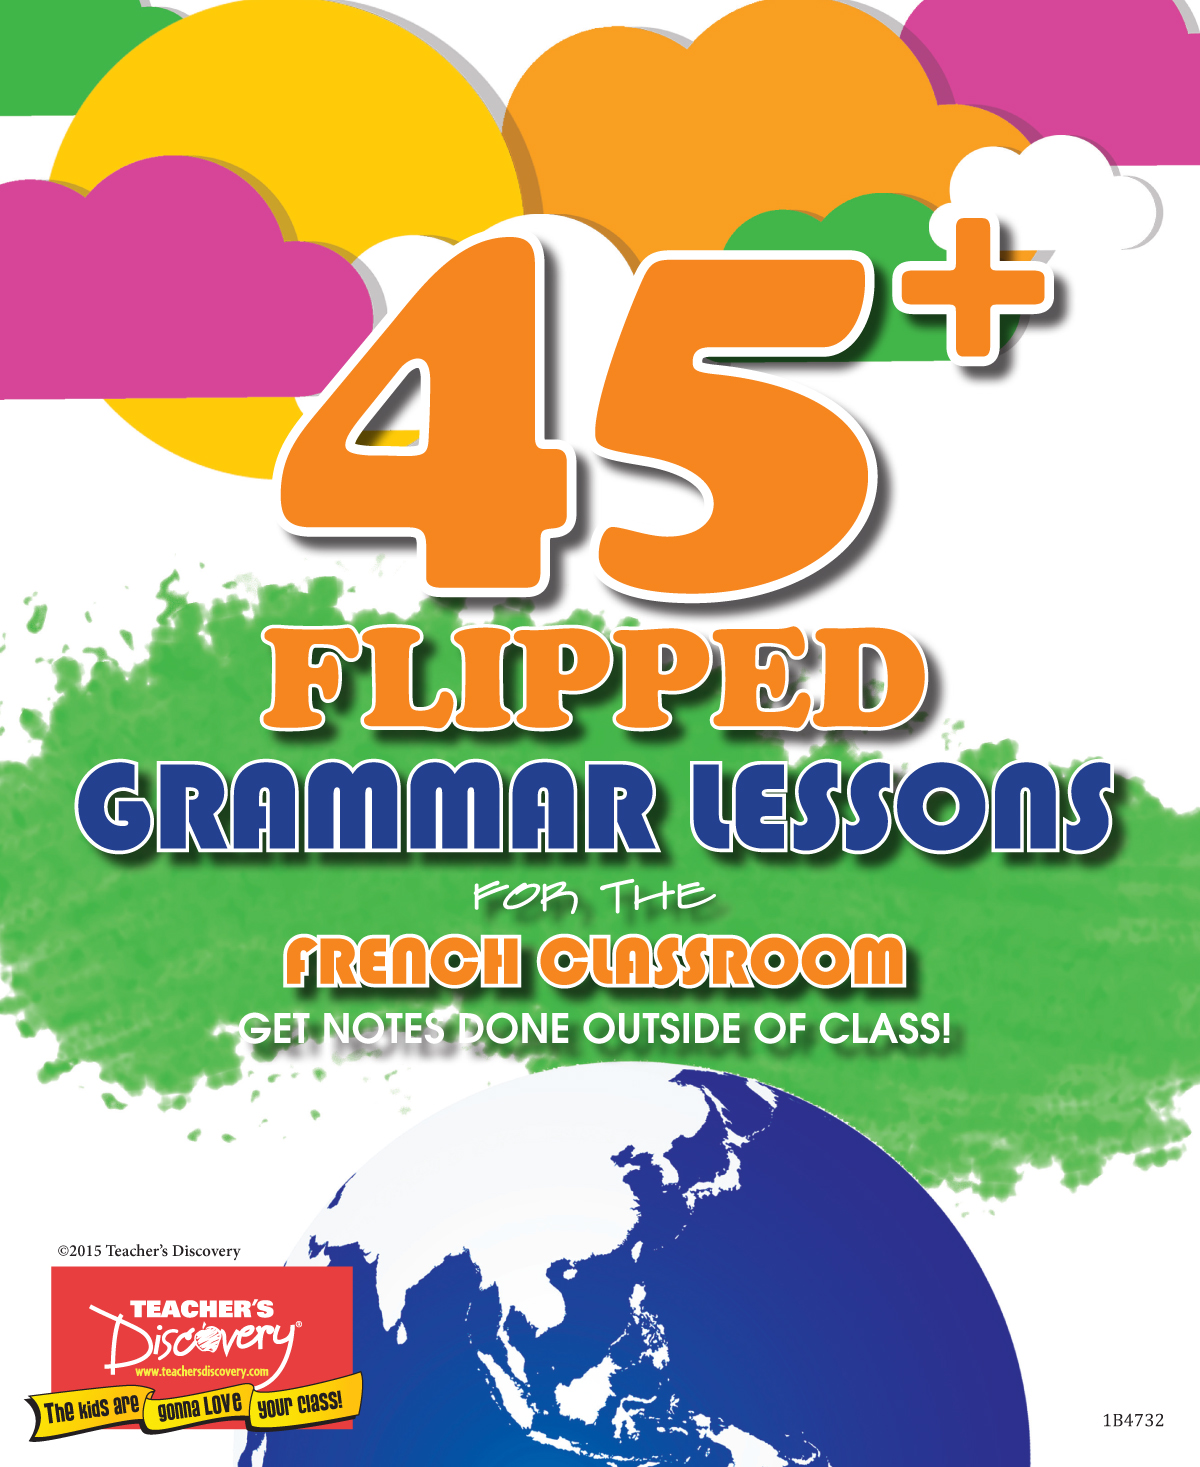 45+ Flipped Grammar Lessons for the French Classroom Book